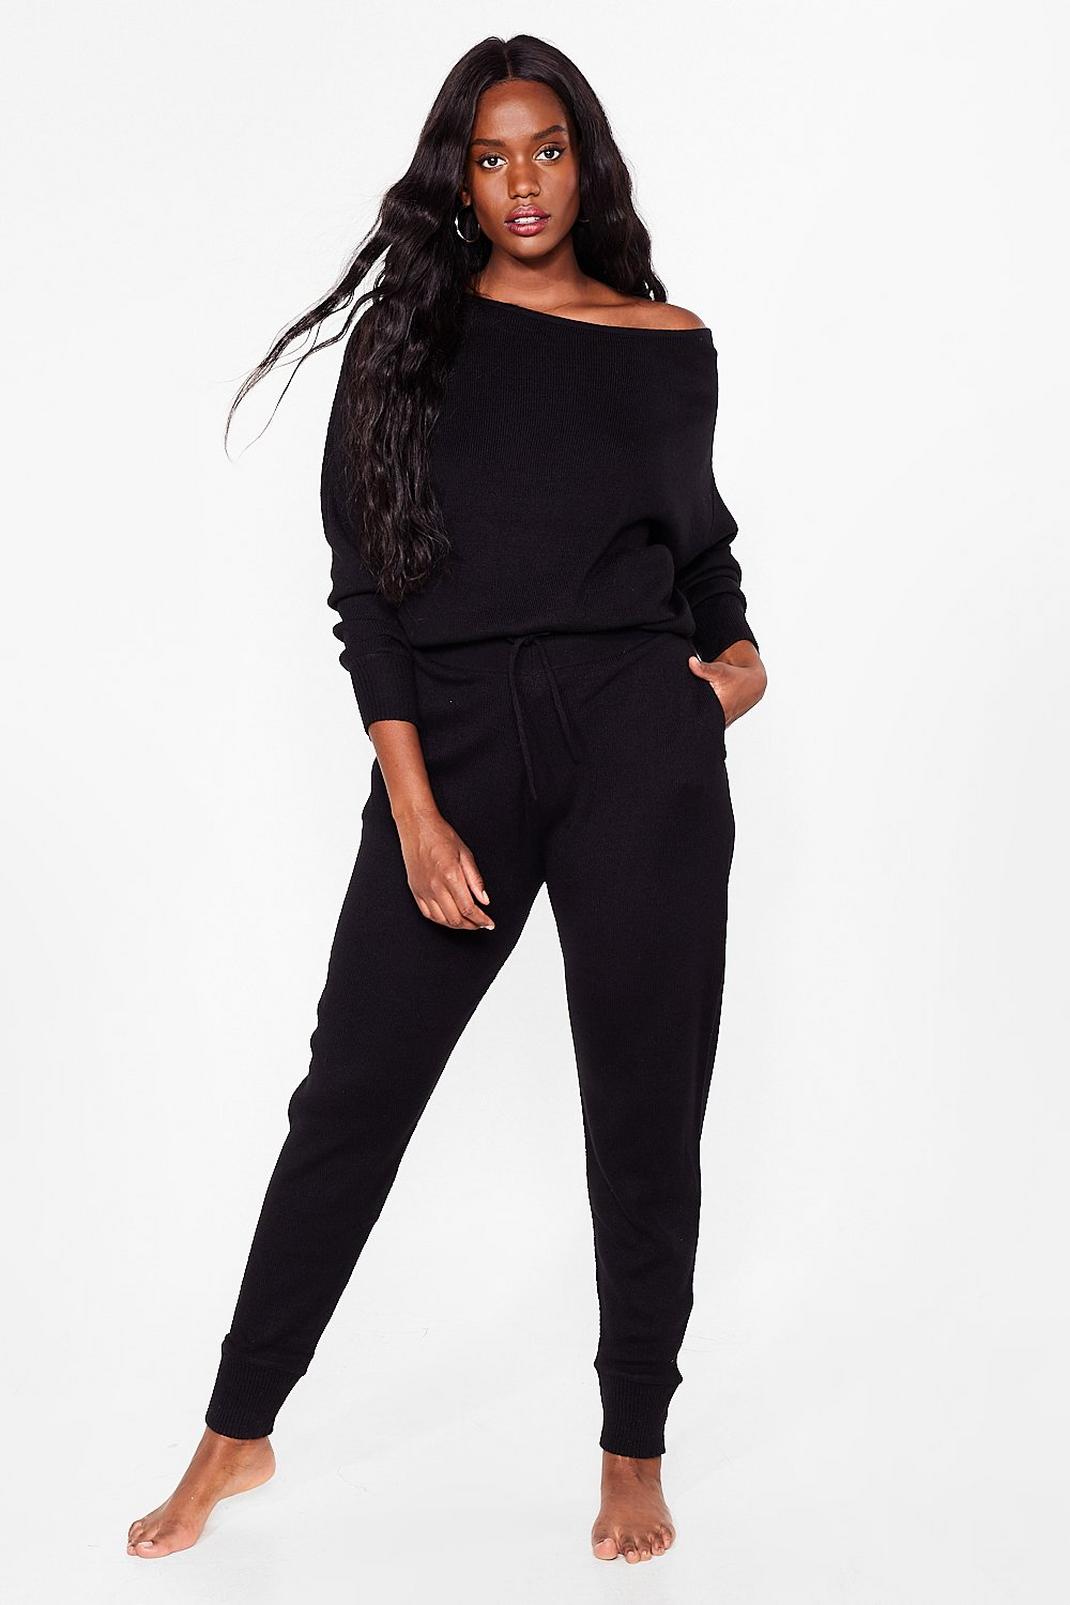 Plus Knitted Jumper & Jogger Set  Lounge wear, Tracksuit women, Plus size  outfits